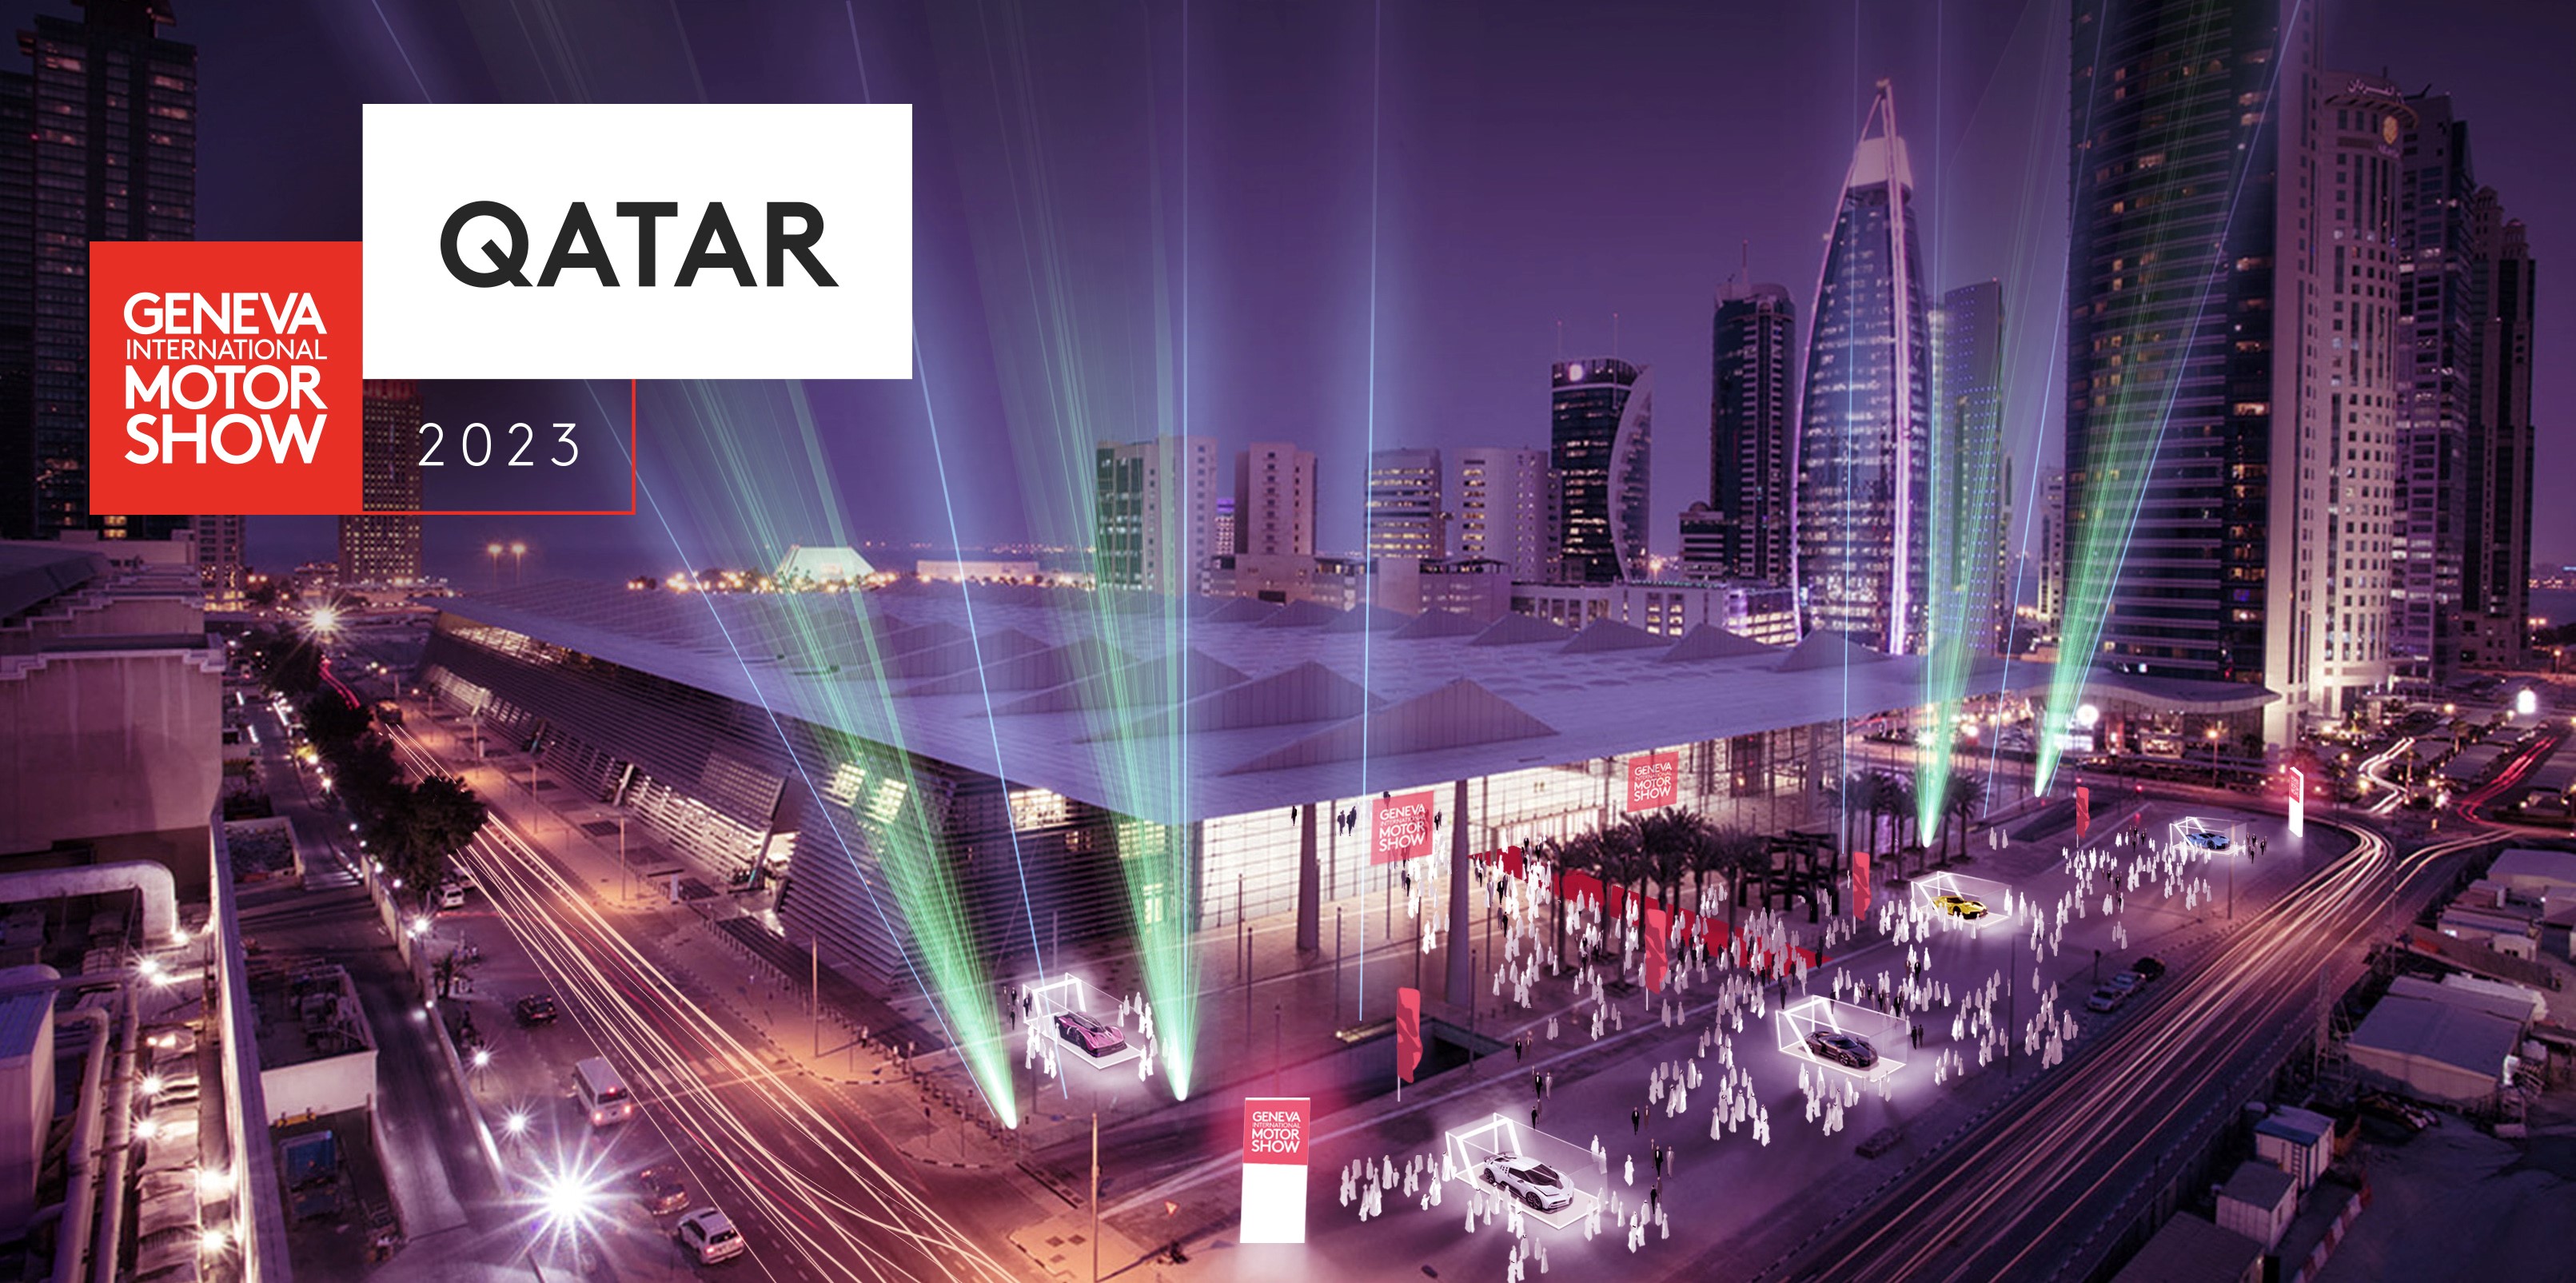 THE GENEVA INTERNATIONAL MOTOR SHOW QATAR IS SET TO TAKE PLACE FROM 5 TO 14 OCTOBER 2023